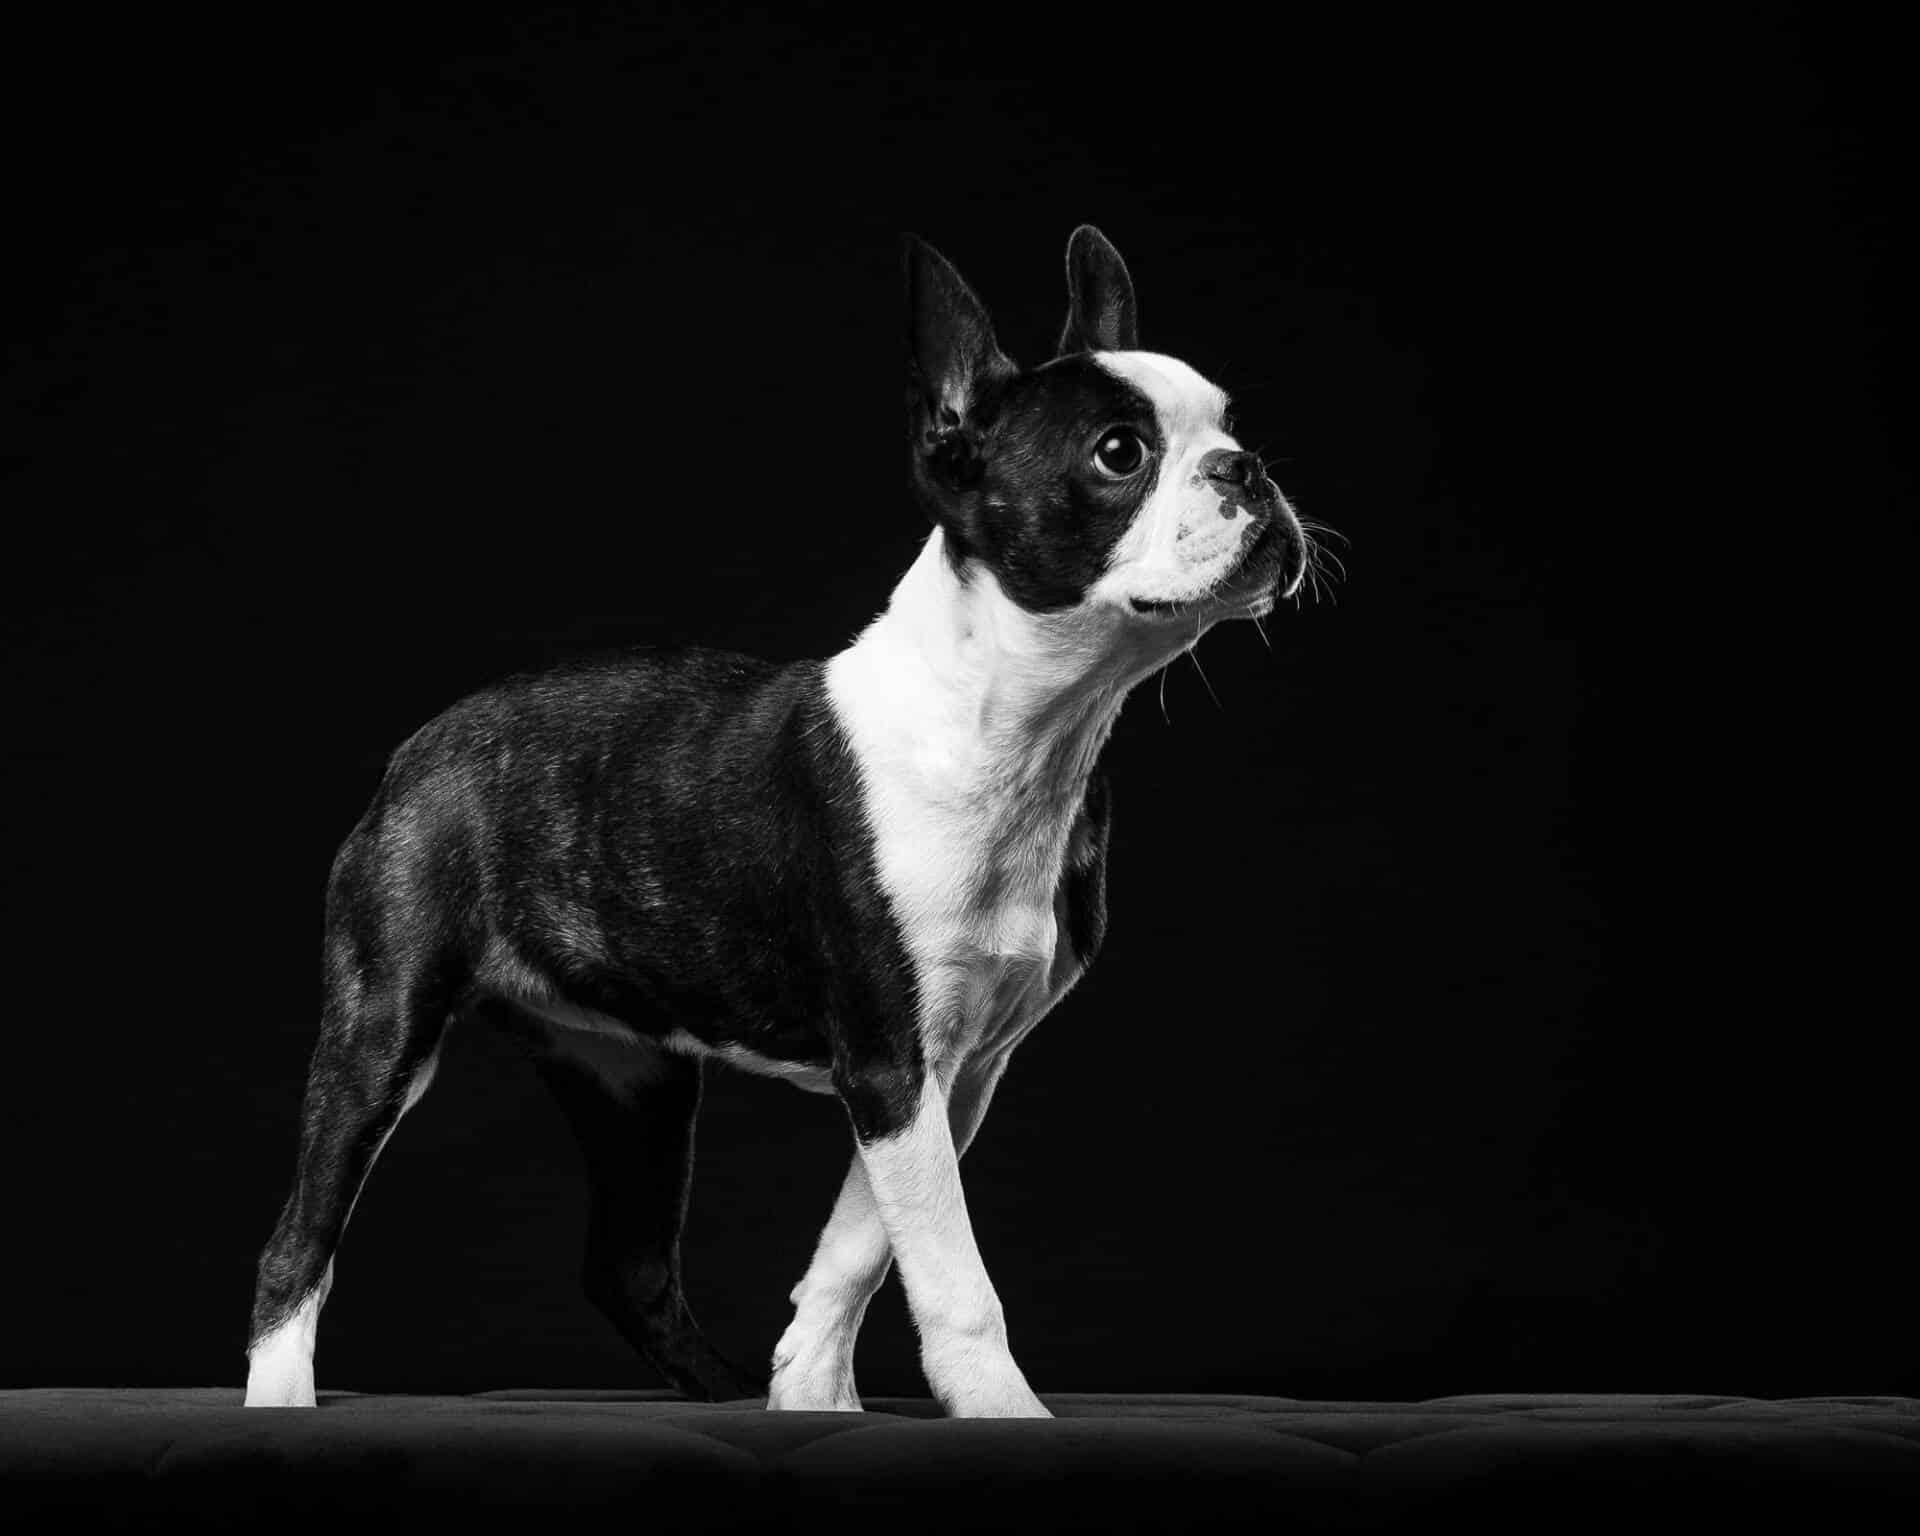 Boston Terrier Dog Portrait by Mark Hewitson of Mark Hewitson Photography, Thame, Oxfordshire